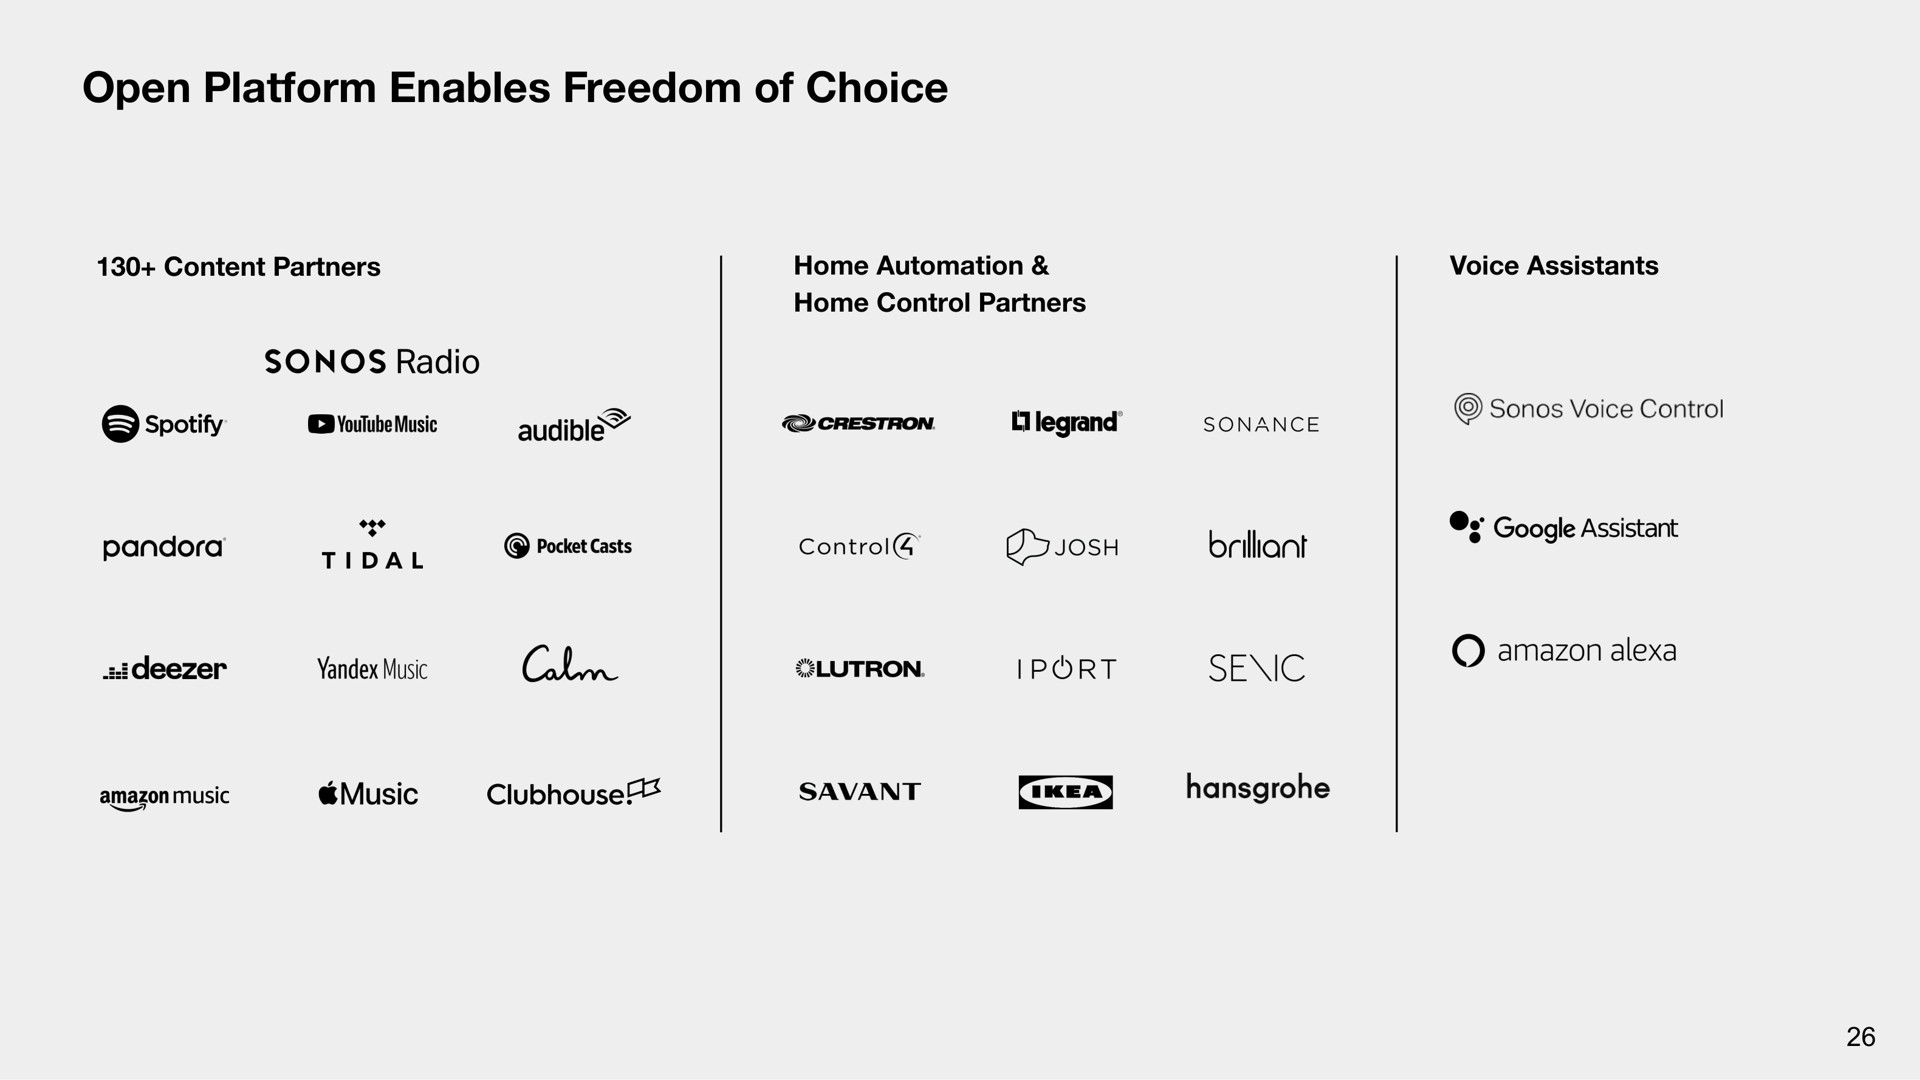 open platform enables freedom of choice | Sonos